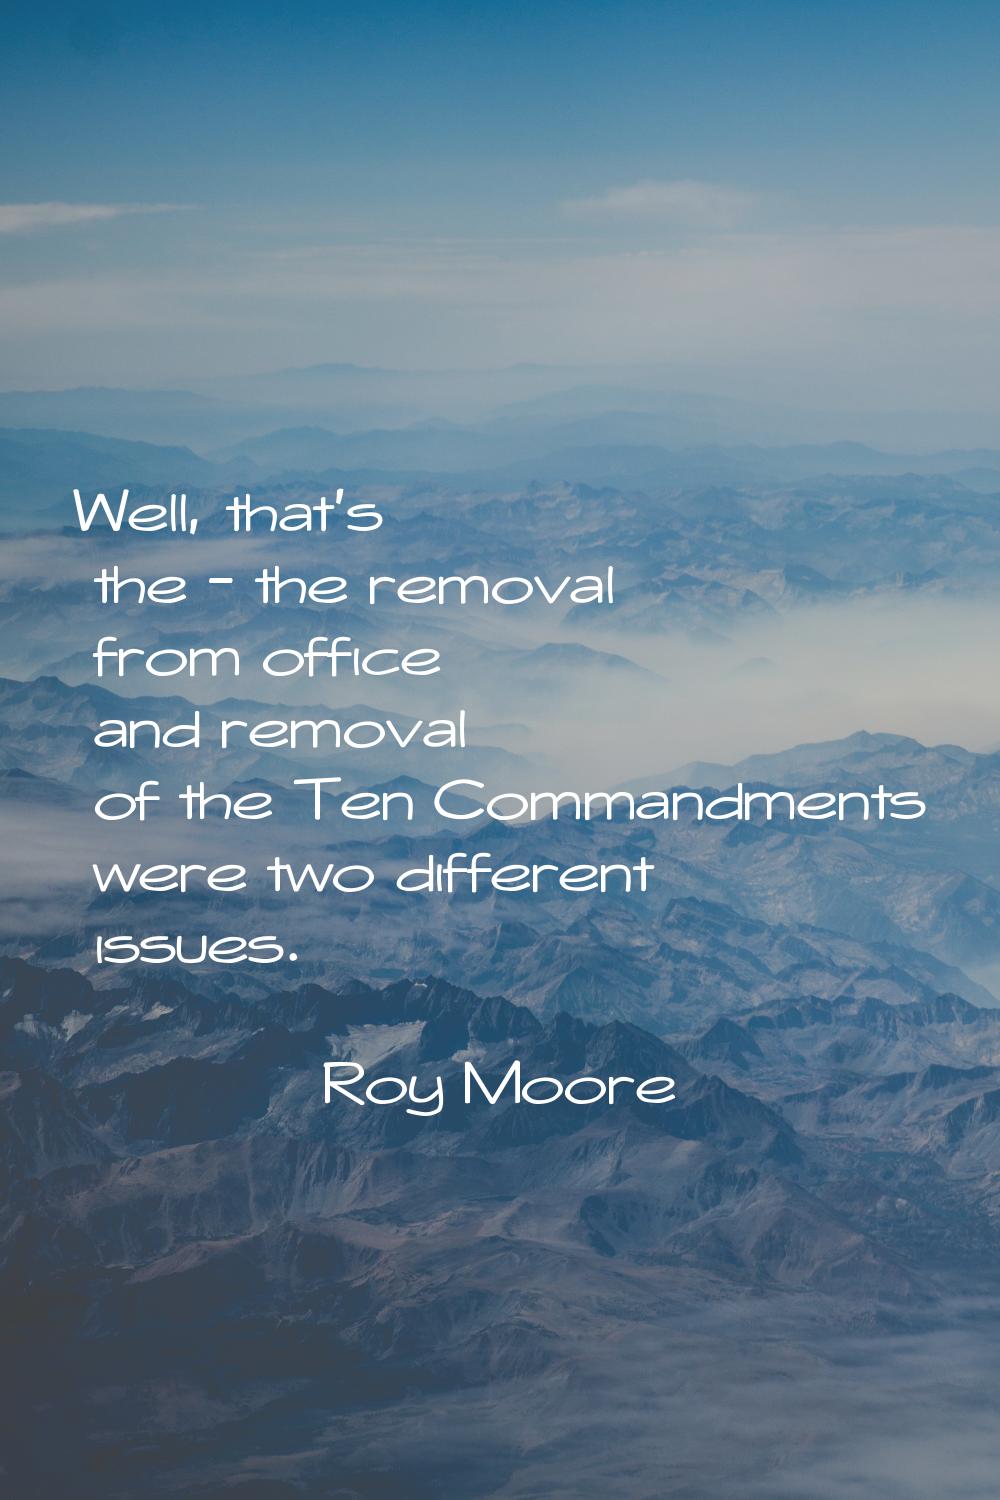 Well, that's the - the removal from office and removal of the Ten Commandments were two different i